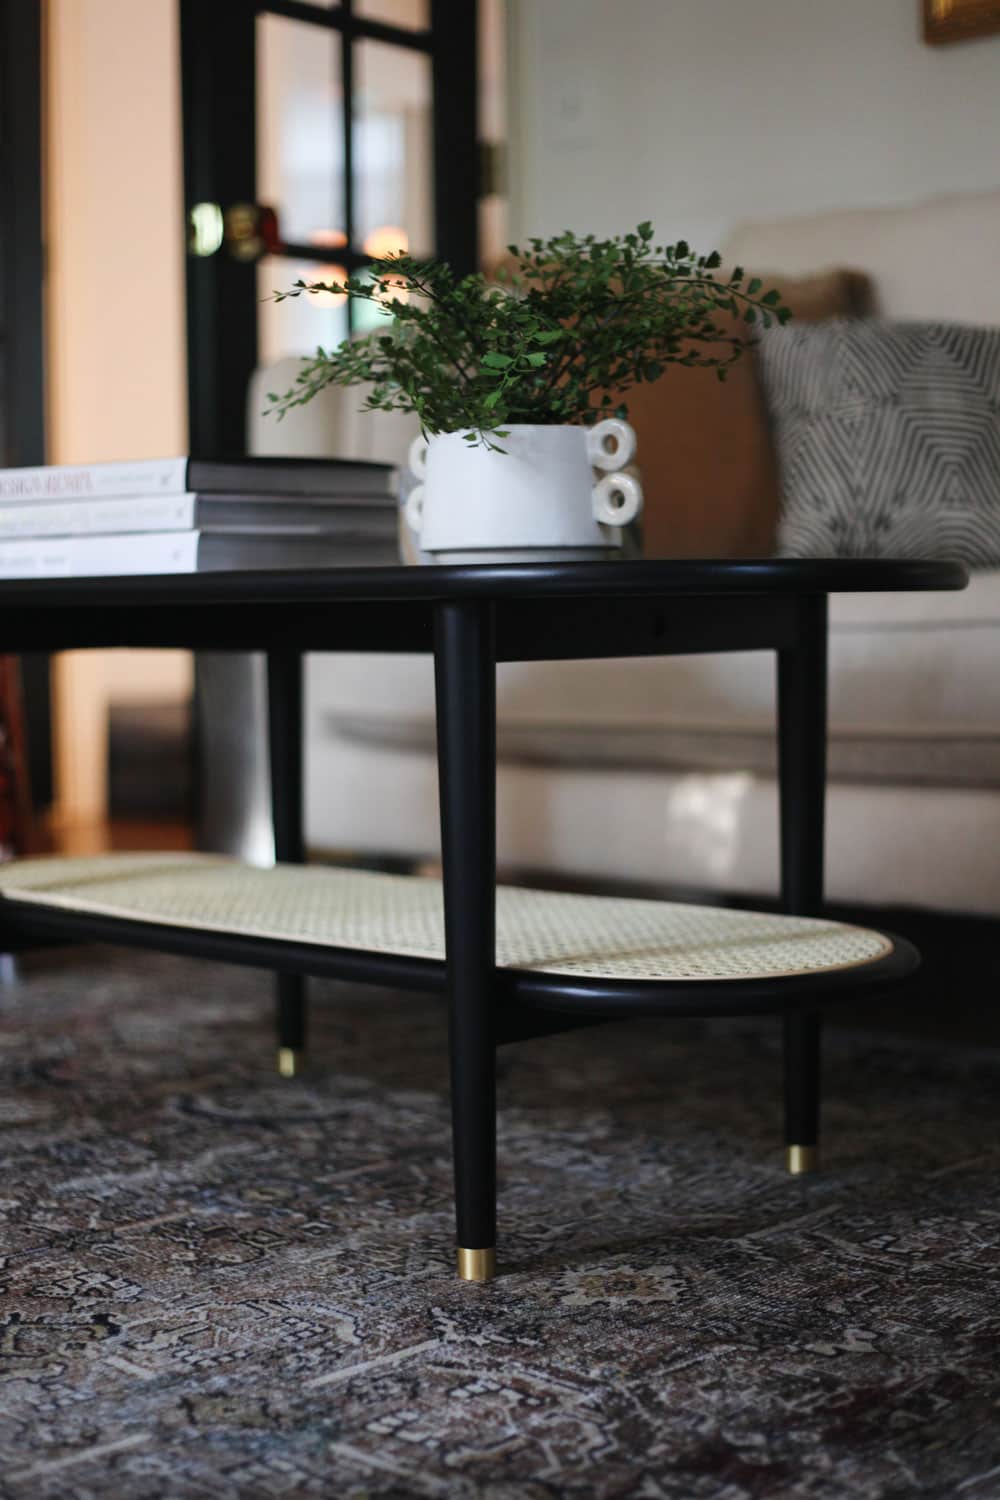 Decorating on a budget - this coffee table was under $100 and found on Amazon